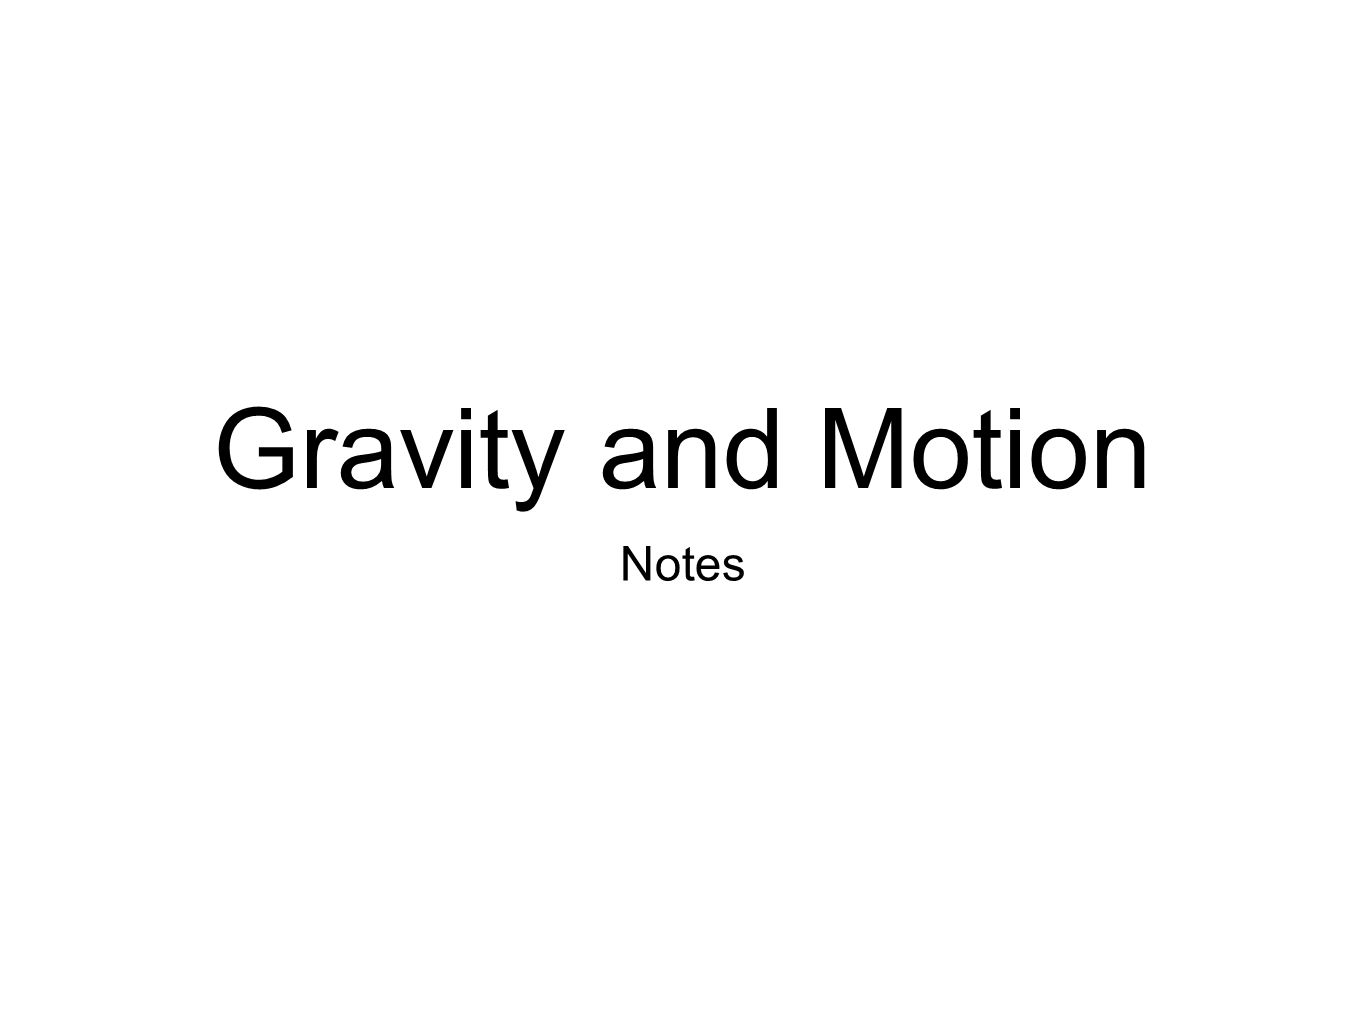 Gravity and Motion Notes